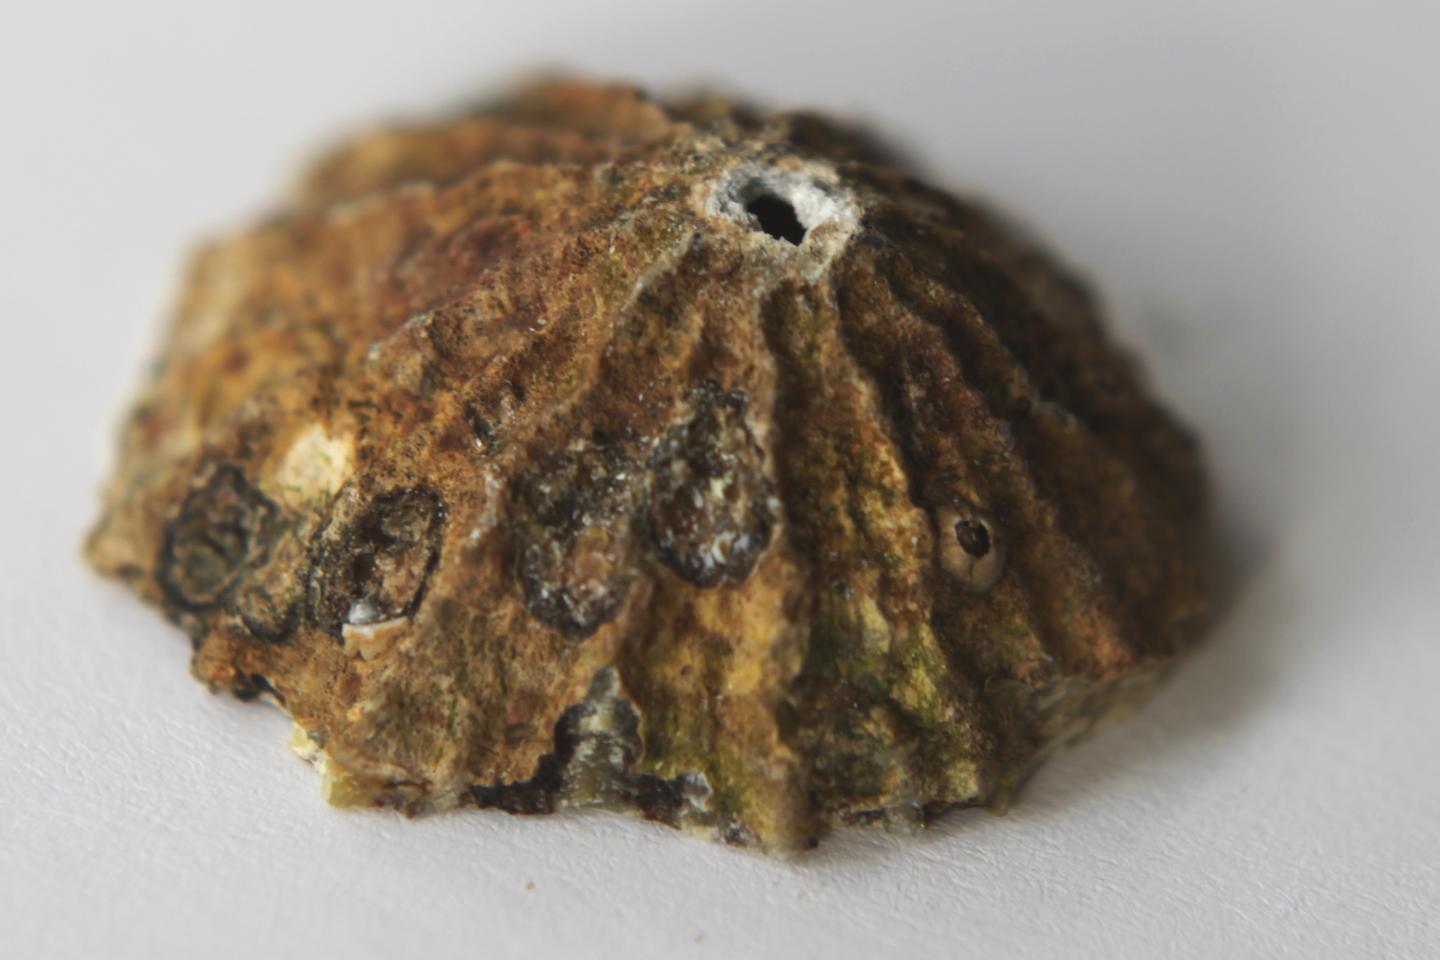 A Limpet Shell that Has Failed at the Apex Due to Impact